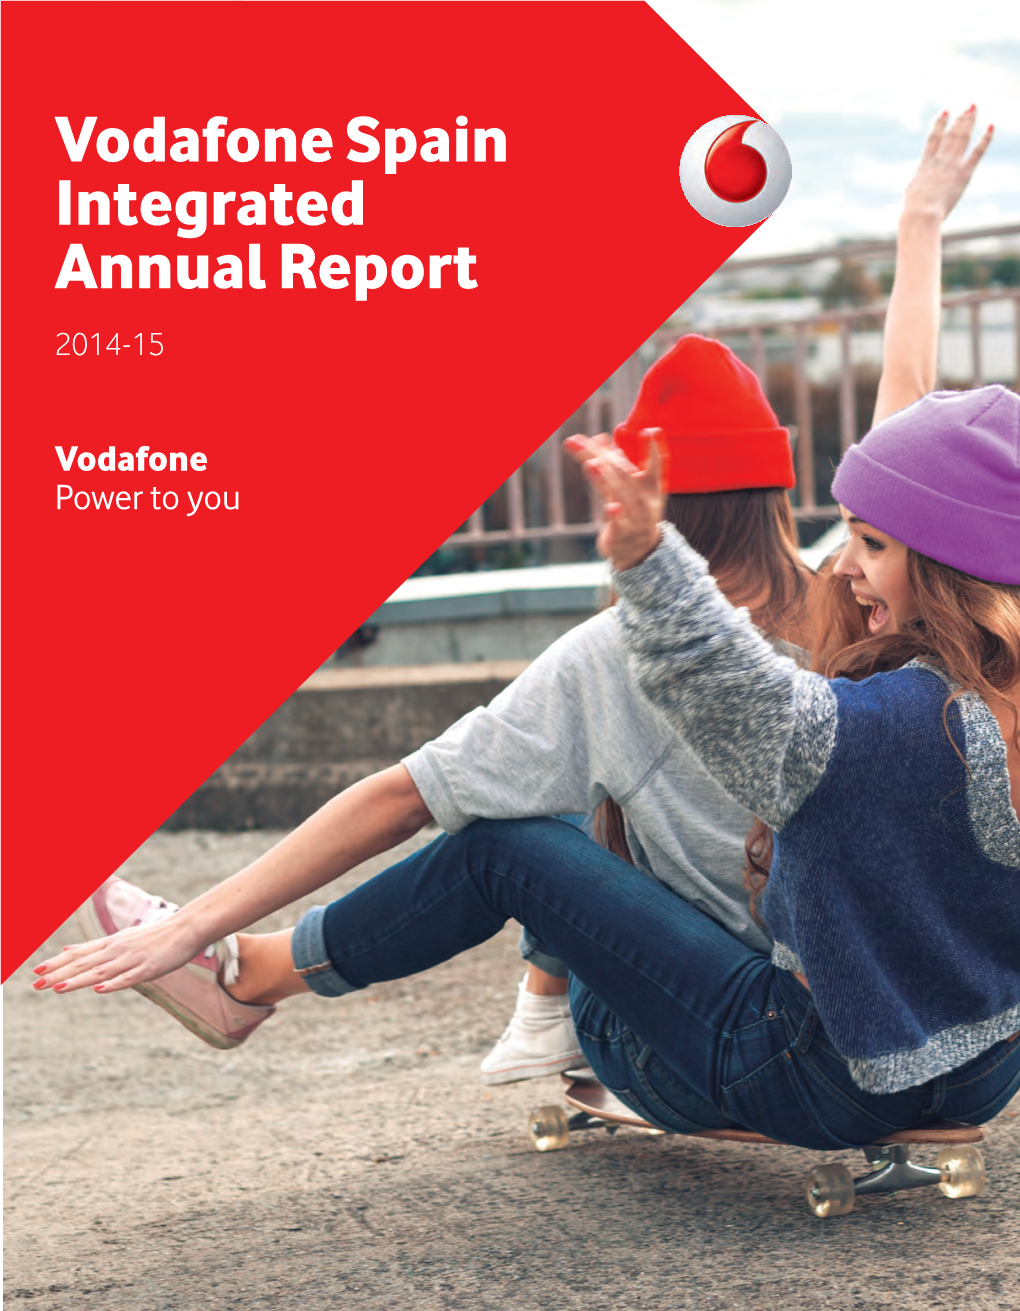 Vodafone Spain Integrated Annual Report 2014-15